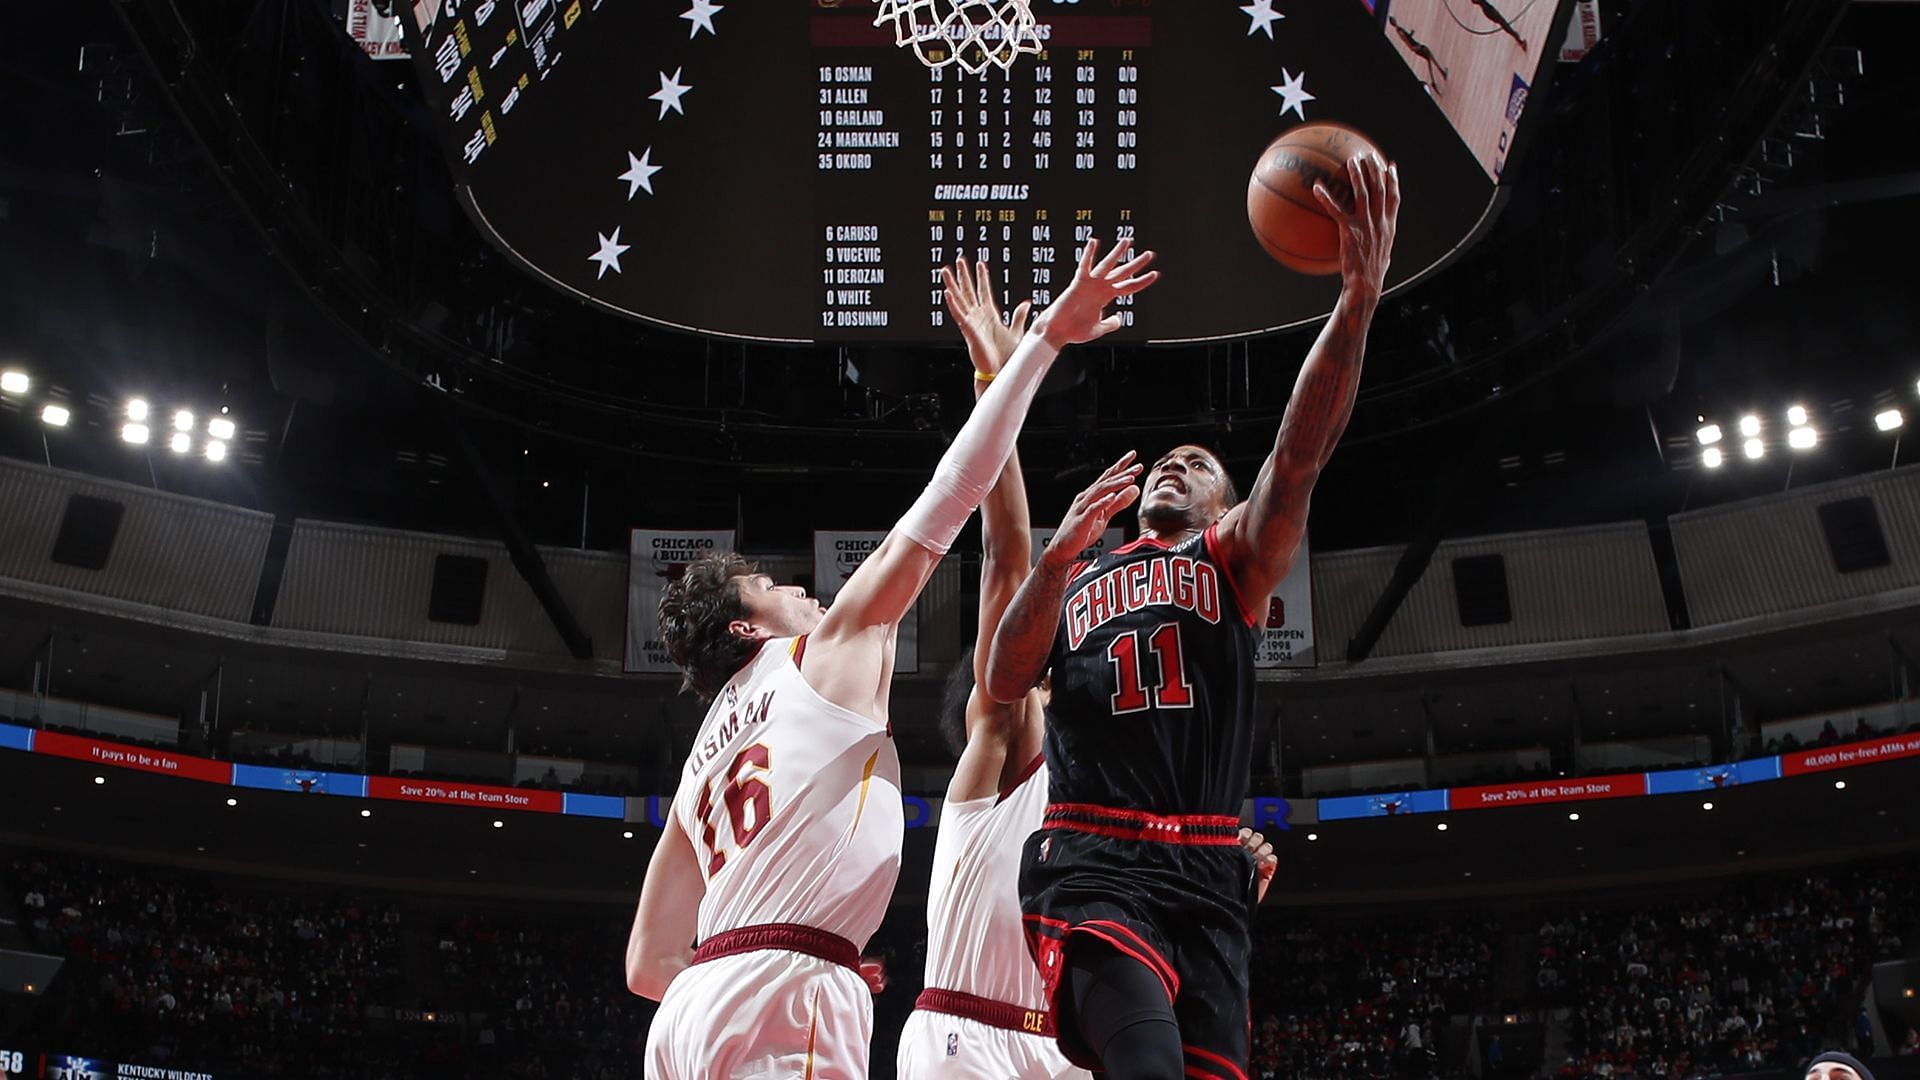 The visiting Cleveland Cavaliers will face the Chicago Bulls for the third time this season on Saturday. [Photo: NBA.com]